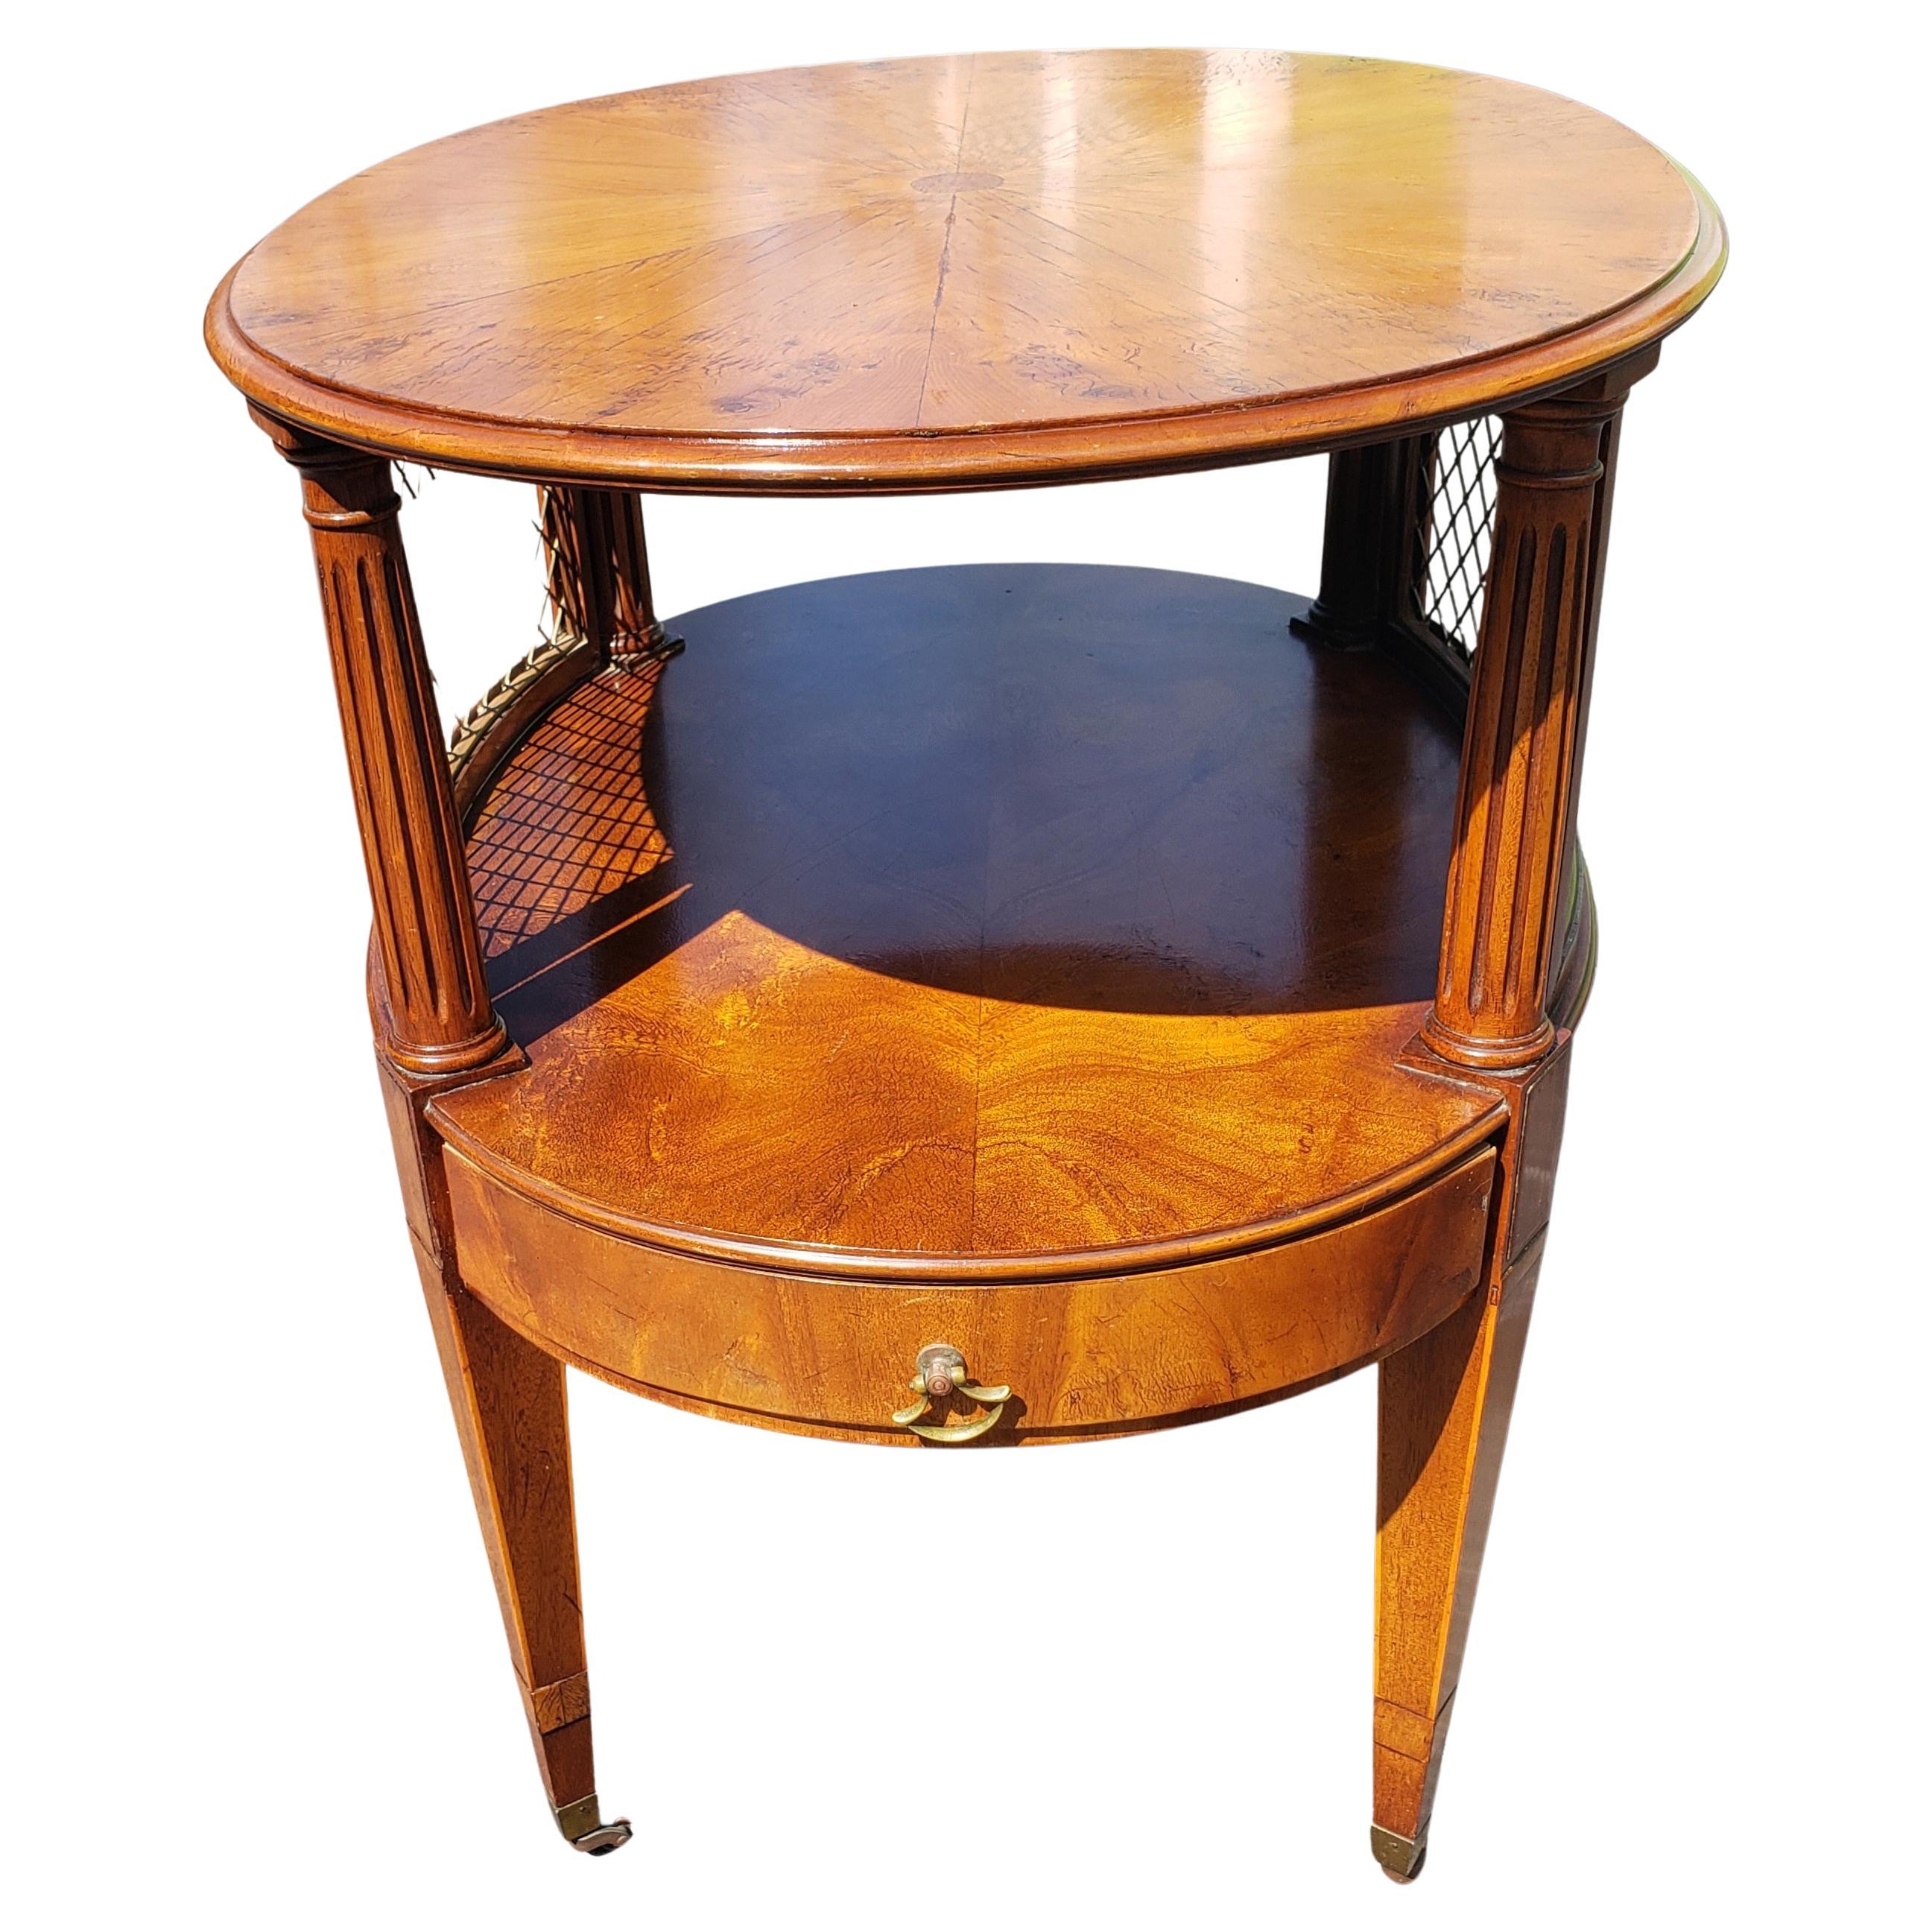 W. A. Berkey & J. Widdicomb Oval Mahogany Occasional Serving Table on Wheels For Sale